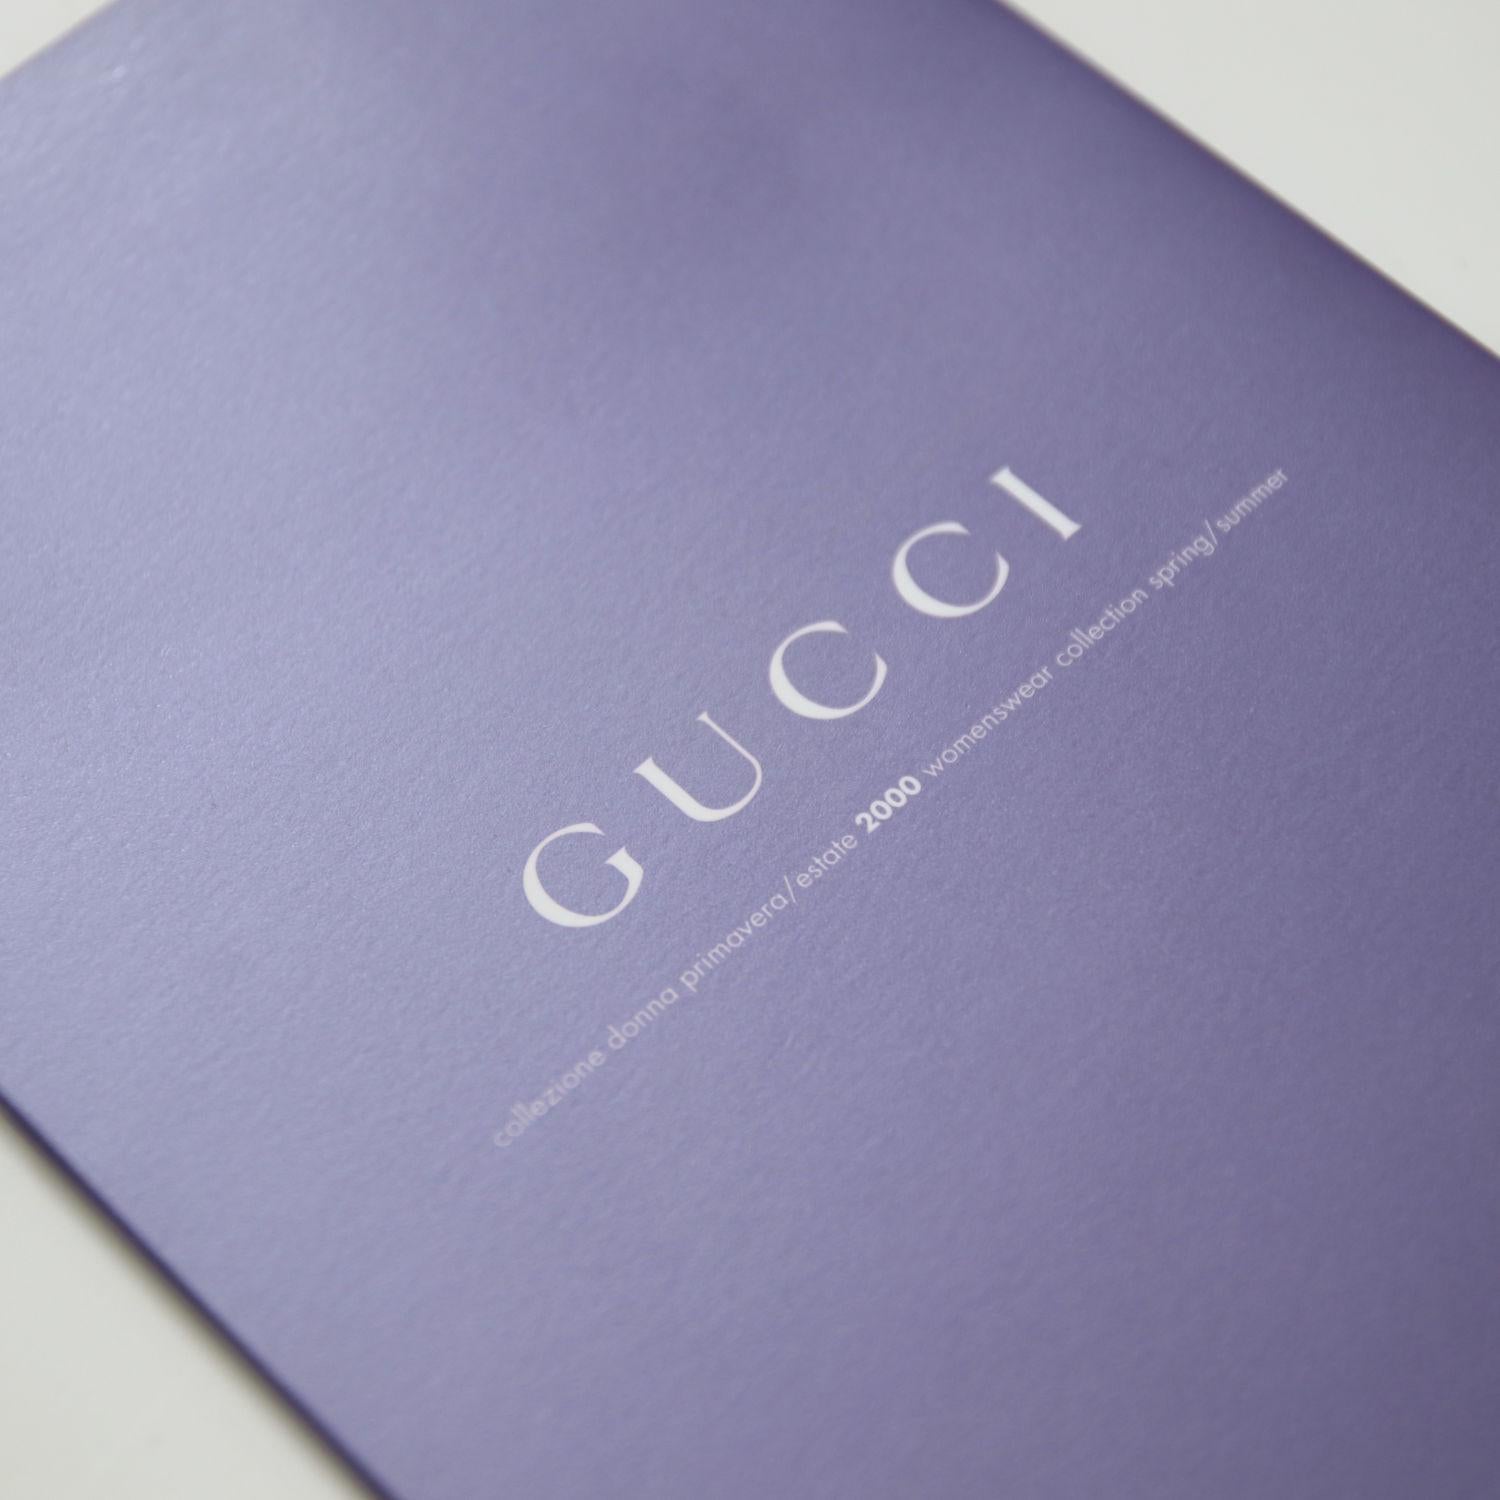 GUCCI 2000 Spring / Summer Catalogue / Folders 

Runway Collection by Tom Ford

Format: approx. 26 cm x 15.5 cm
A must for fashion fans and collectors.

Buy Now Or Cry Later!

The catalogue is in good condition (see photo).
